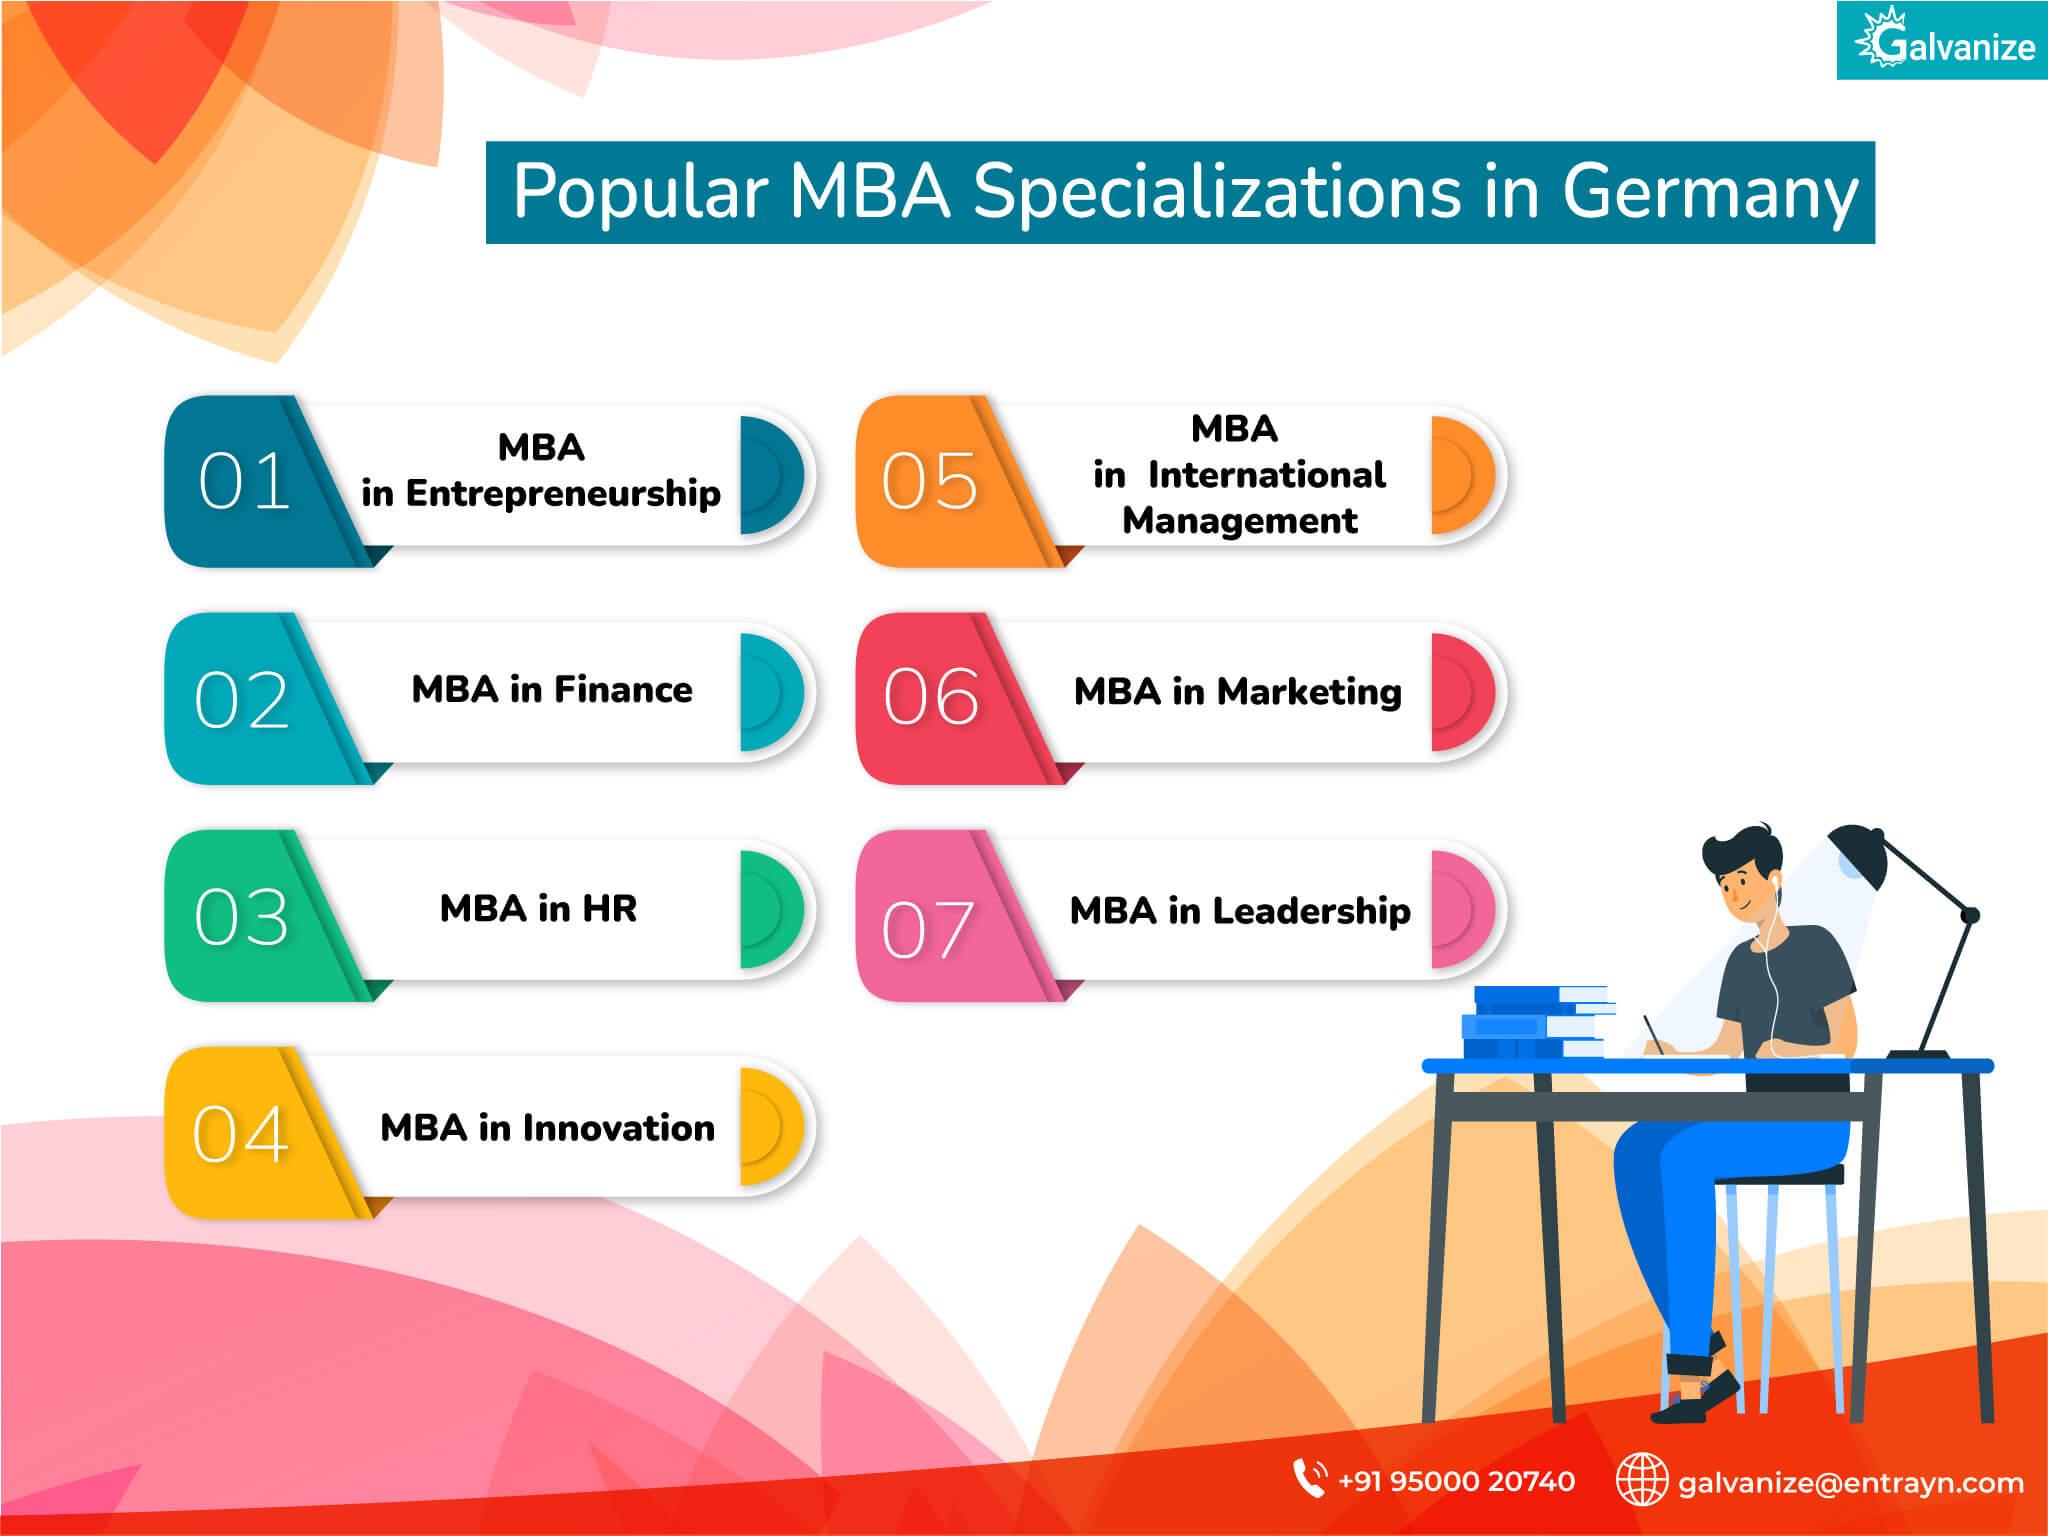 Popular MBA specializations in Germany